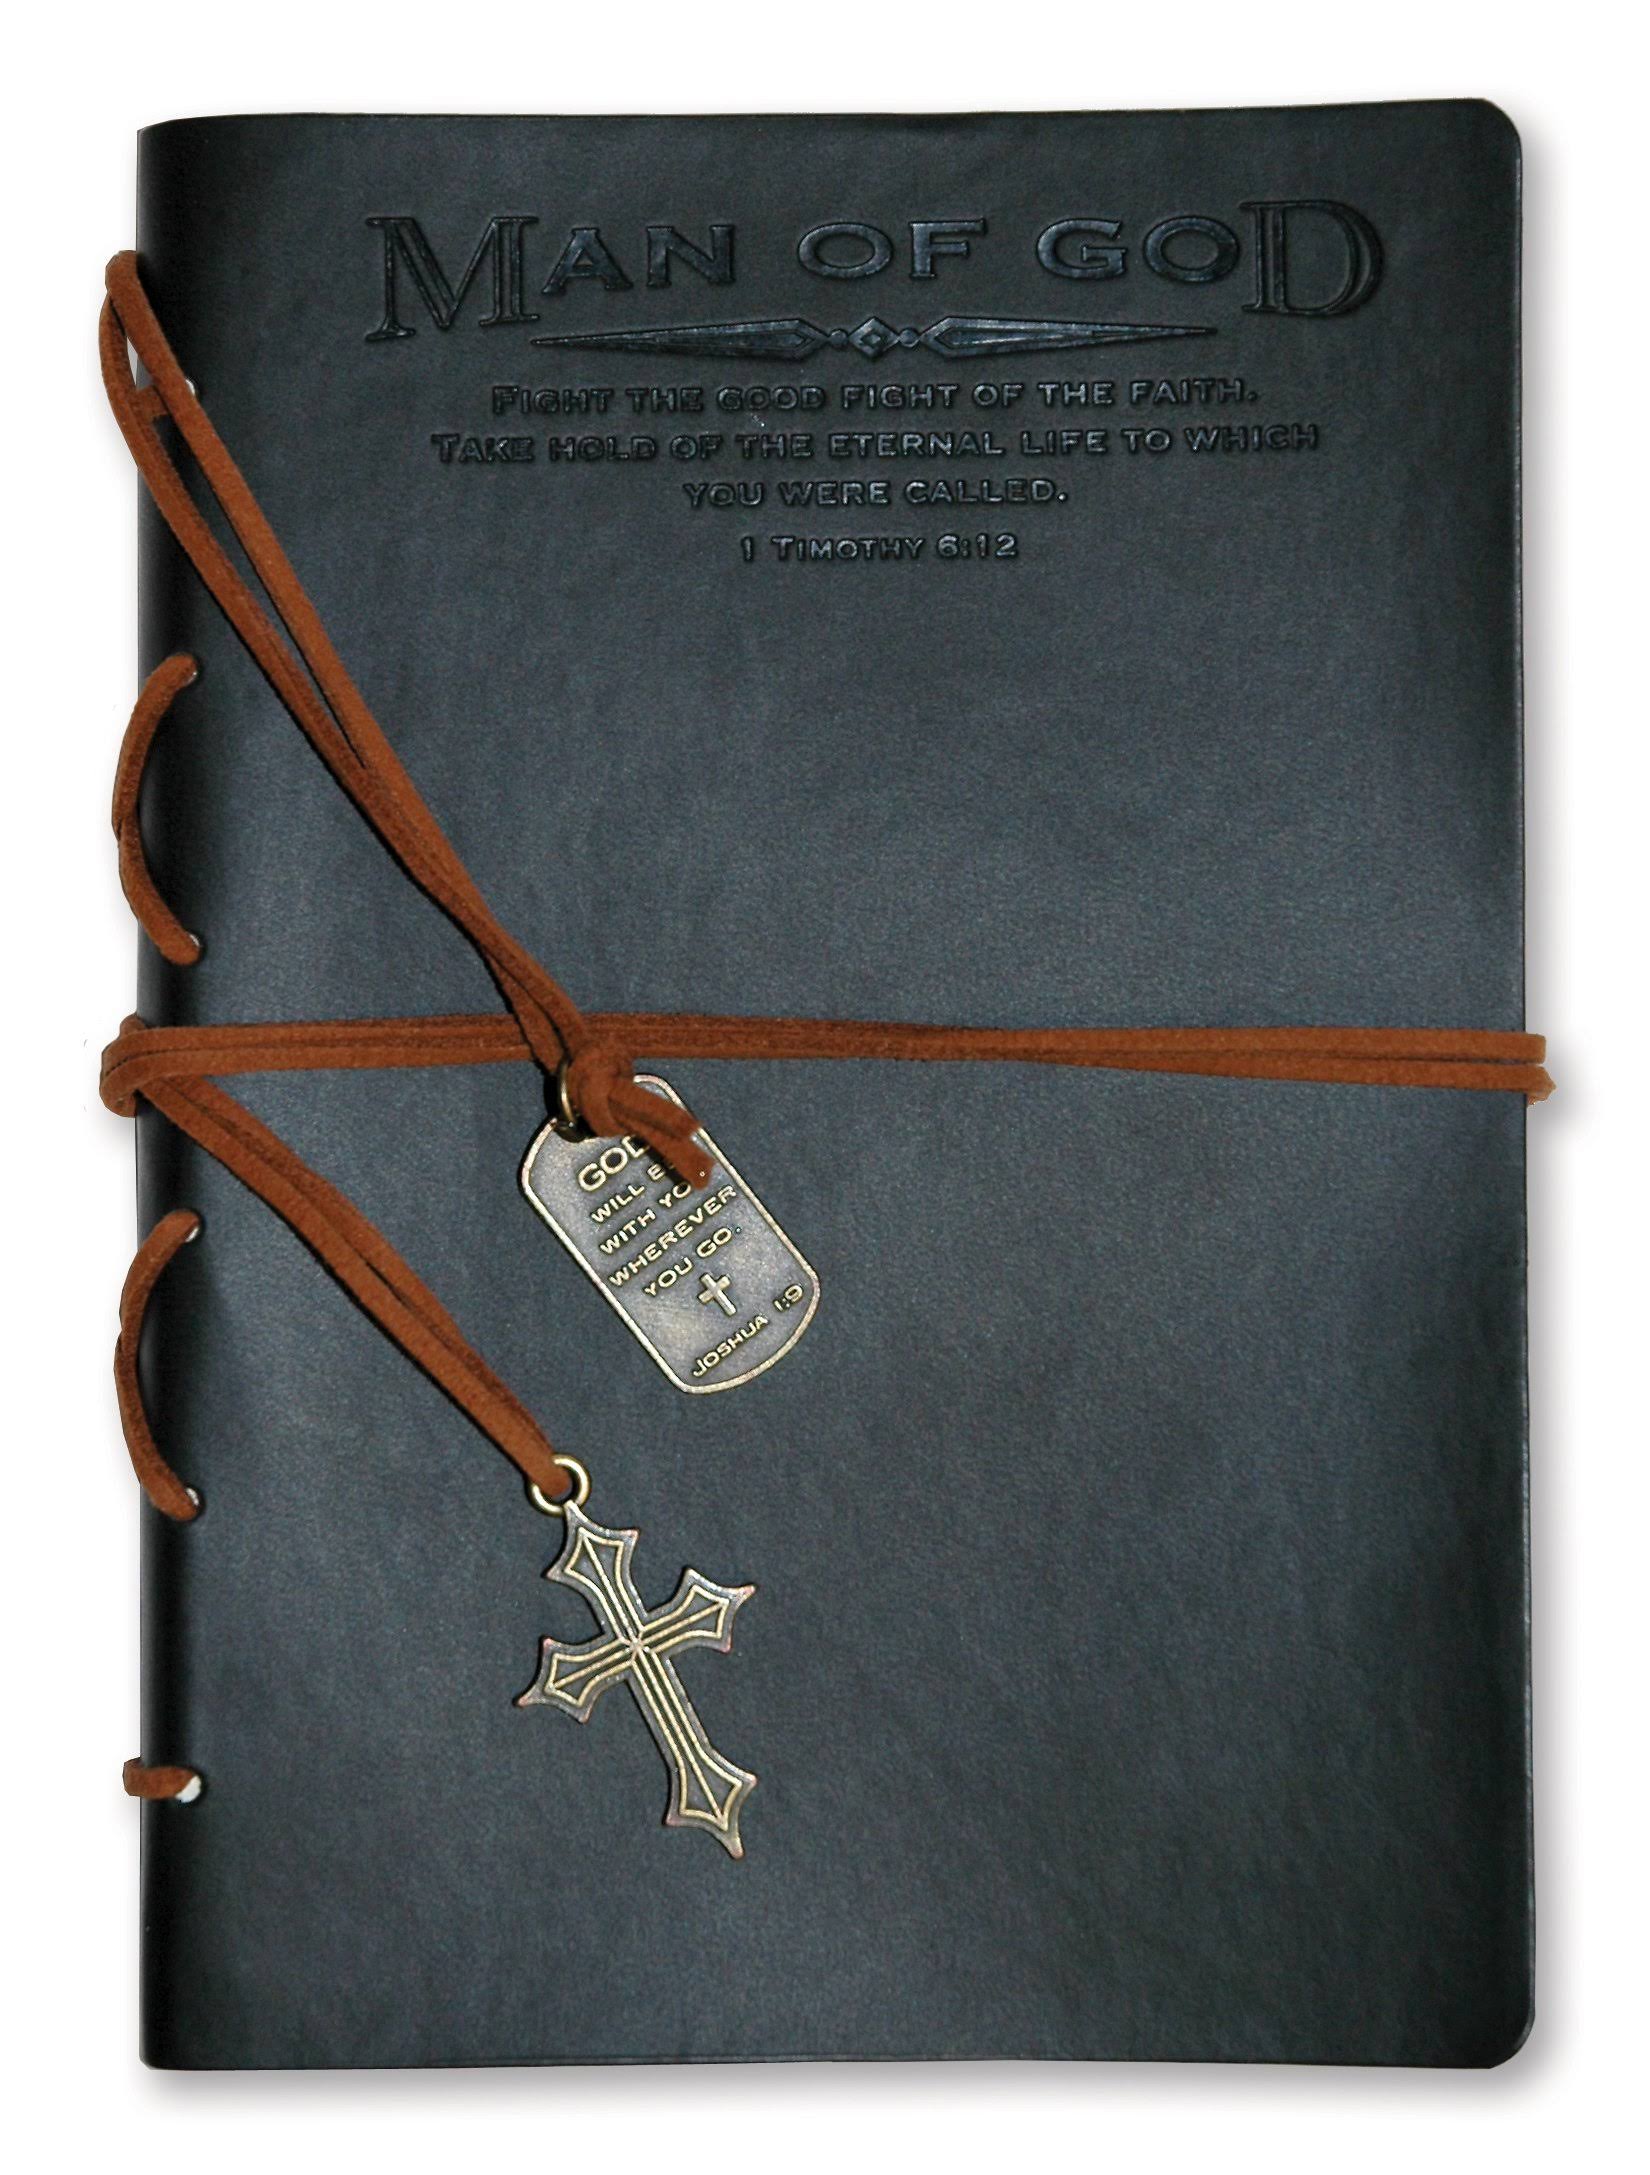 Divinity Boutique 22880 Journal Man of God - With Black Cross Charm